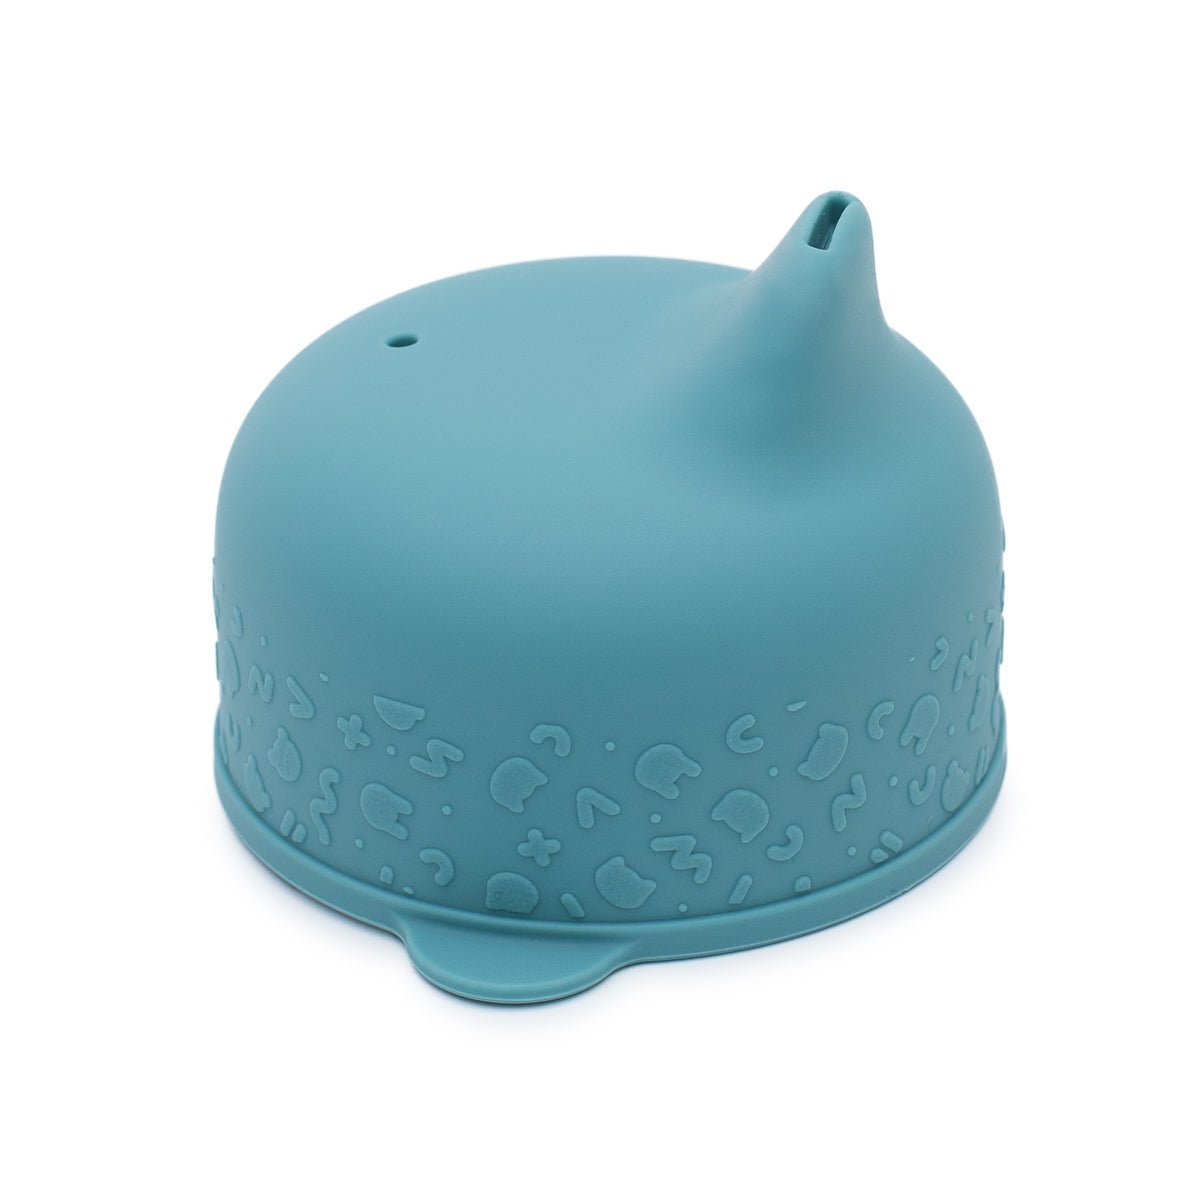 The Sippie Lid - The No-Spill Sippy Cup Lid with Straw in Blue Dusk